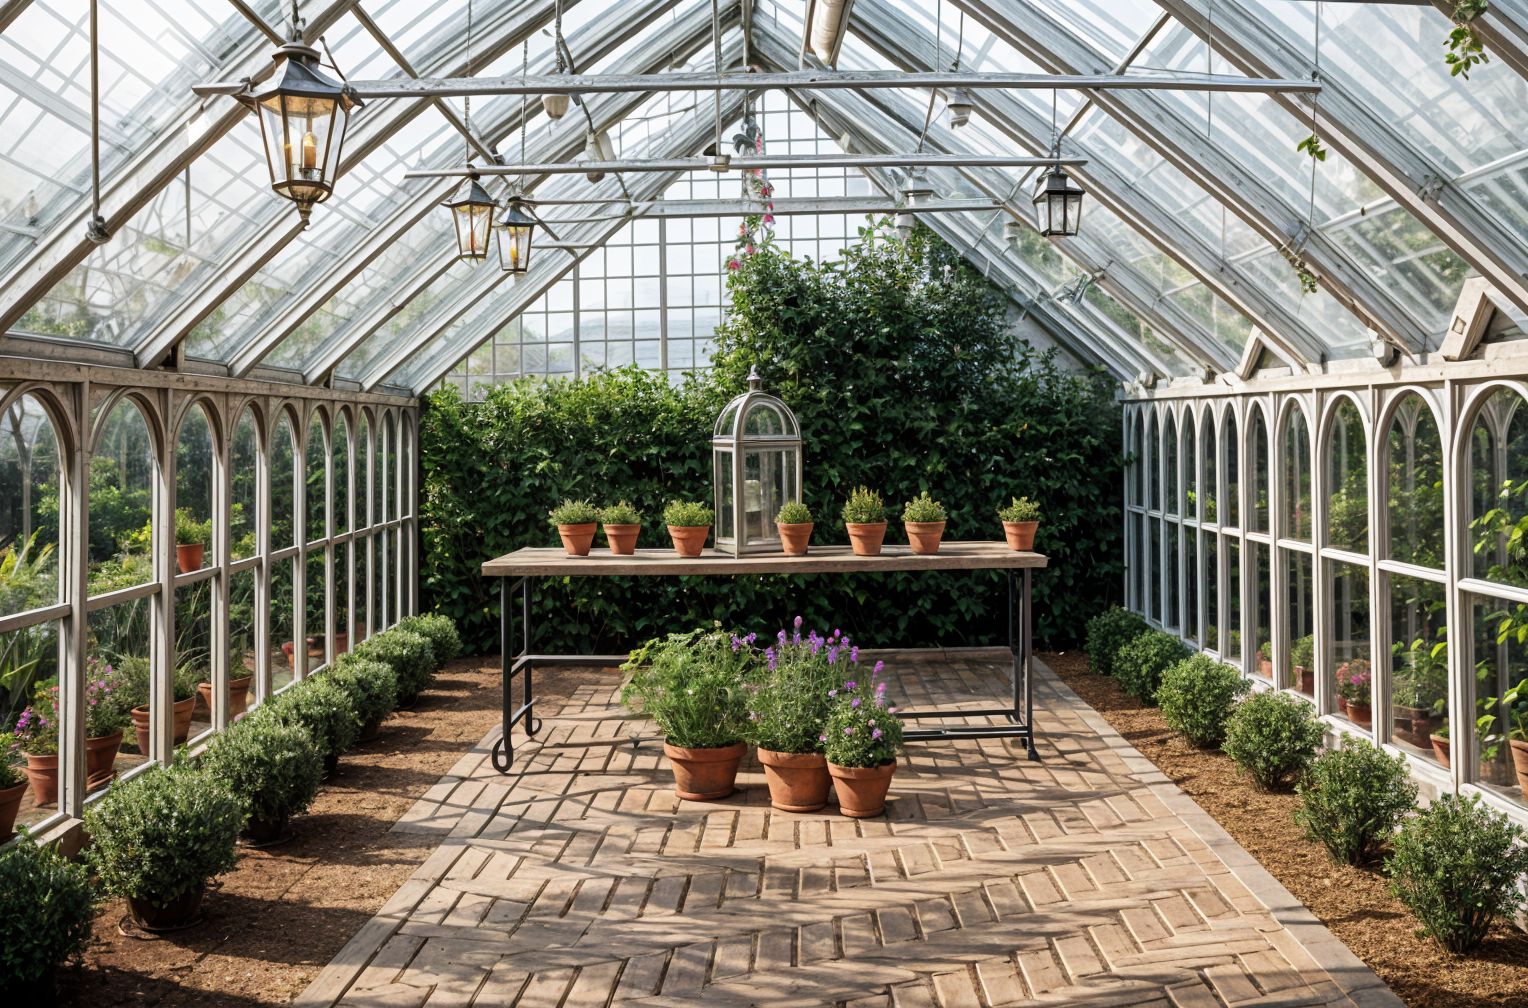 Colonial Greenhouse